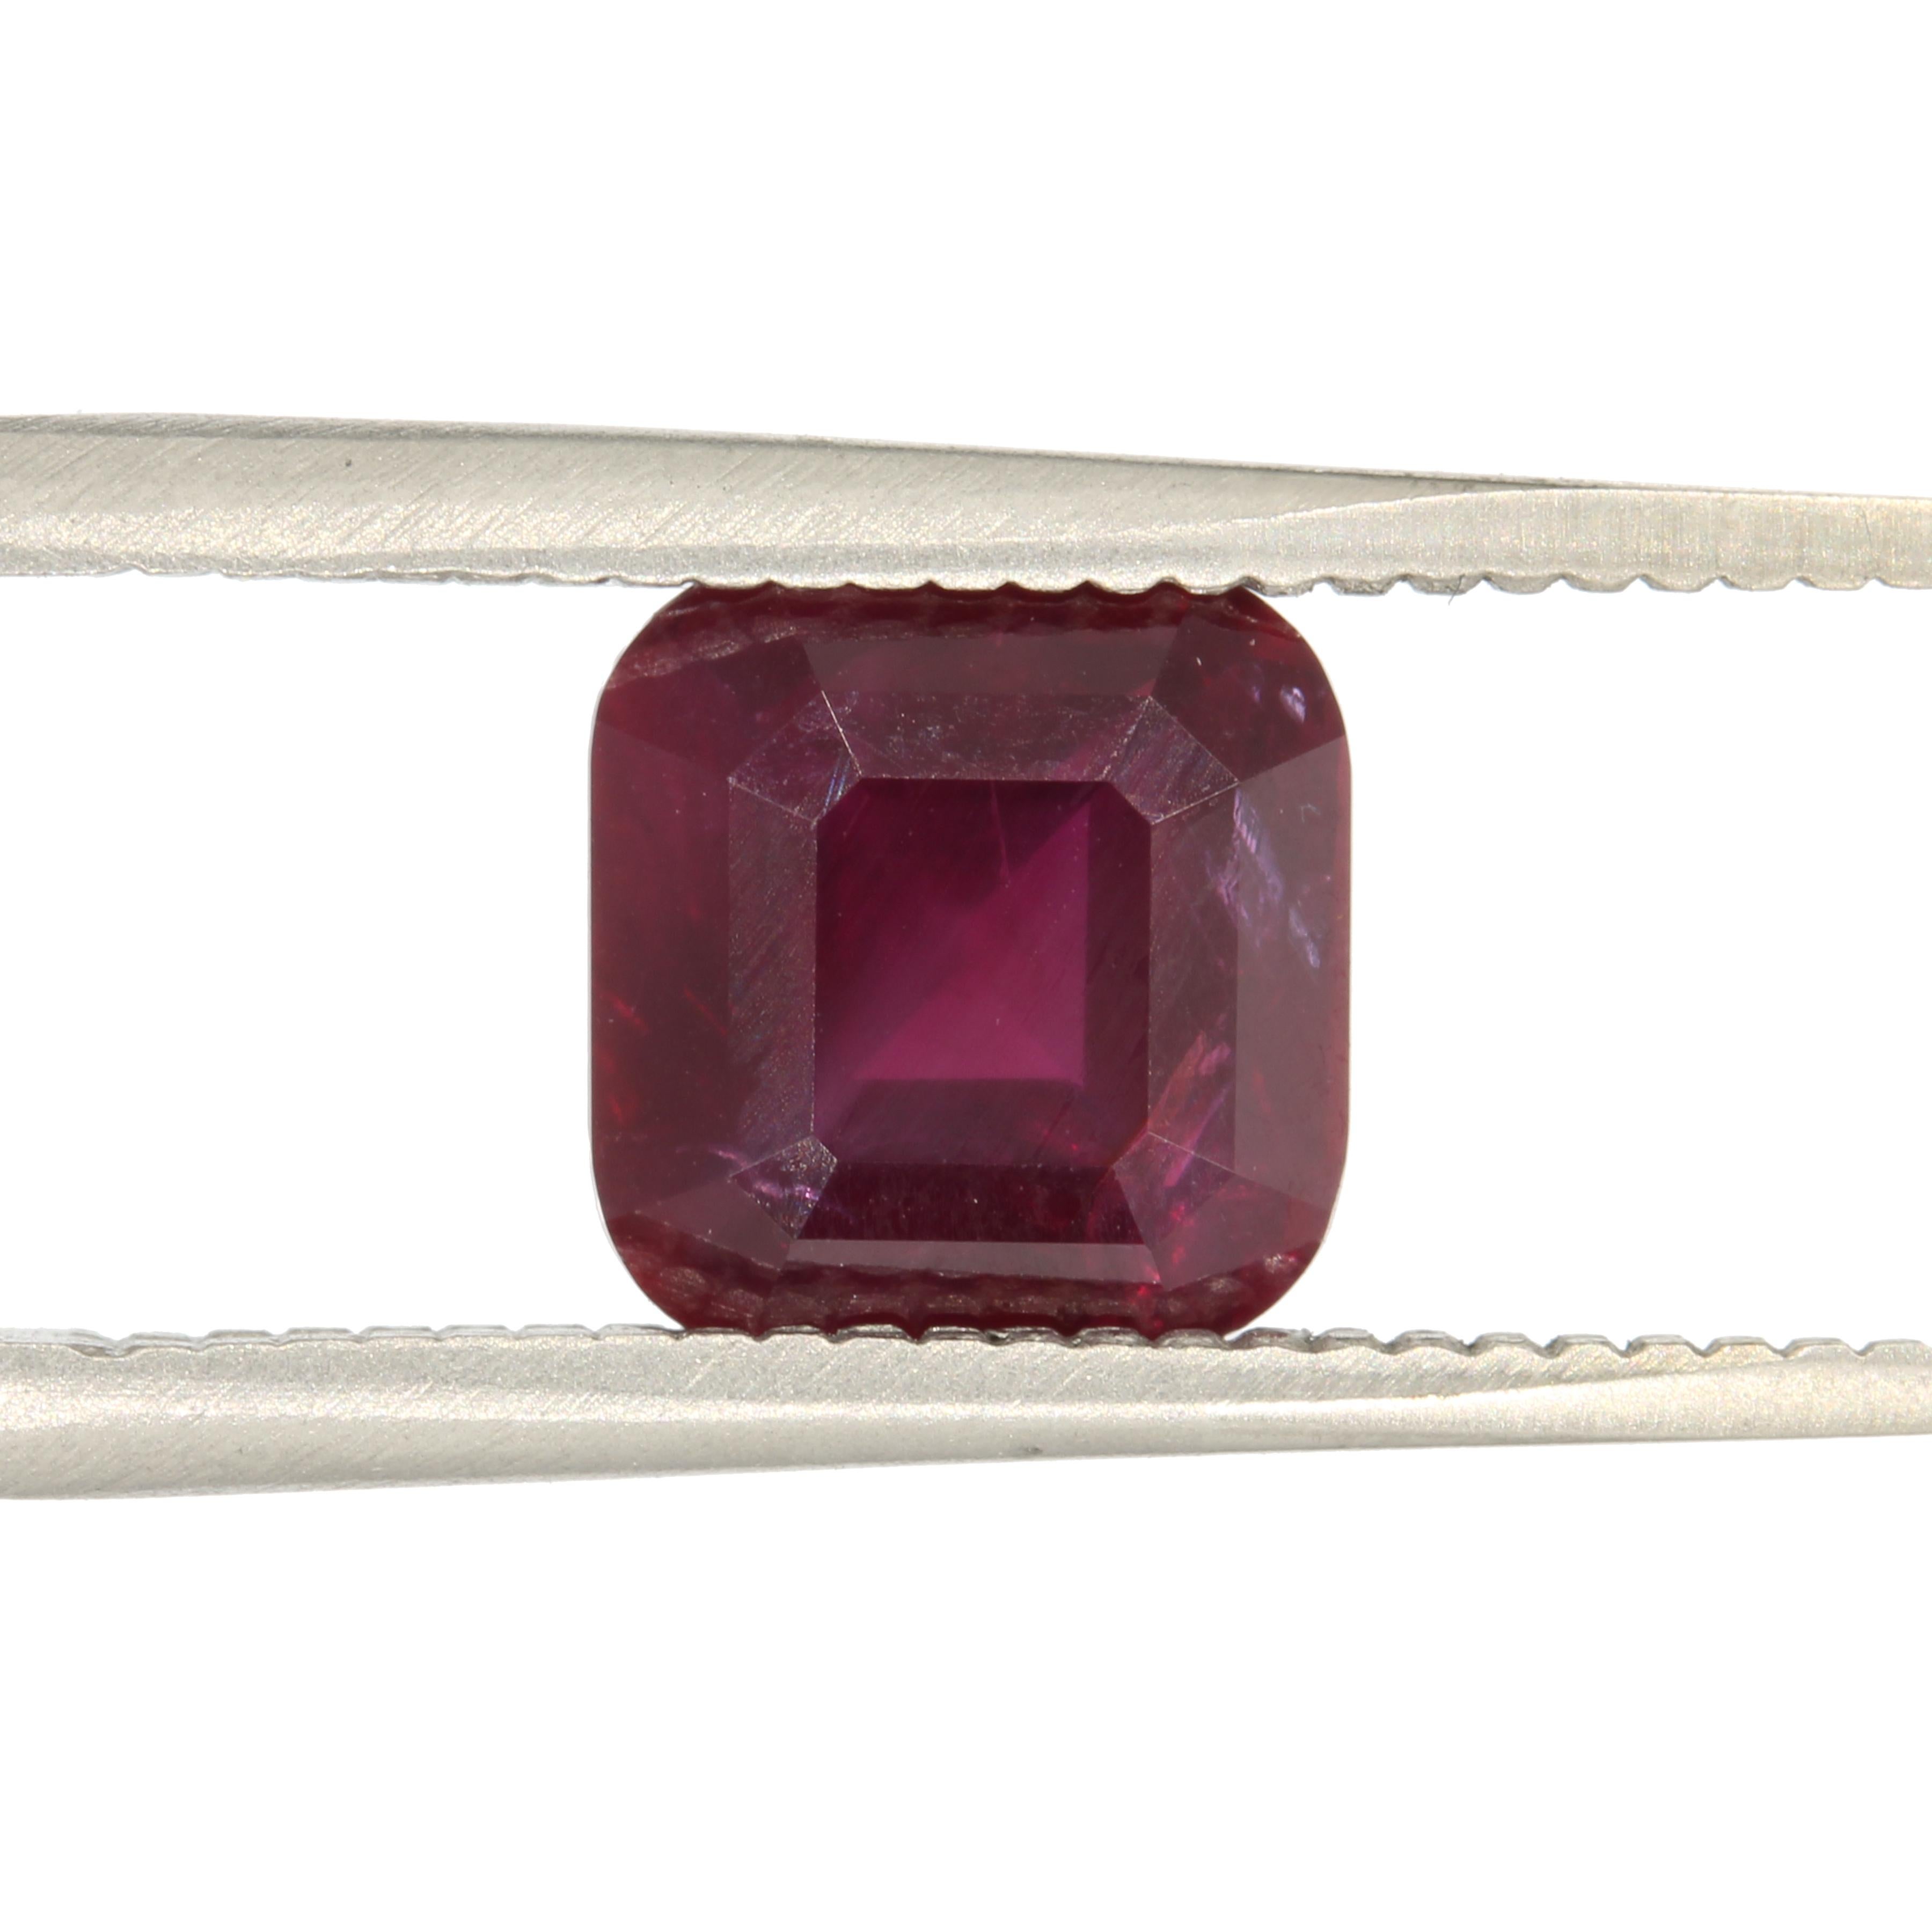 We are delighted to be able to offer for sale, this stunning 2.12 carat cushion red ruby from our collection. It has been certified by GRS as originating from the Winza mine in Tanzania. It shows no indication of thermal treatment (which is used to